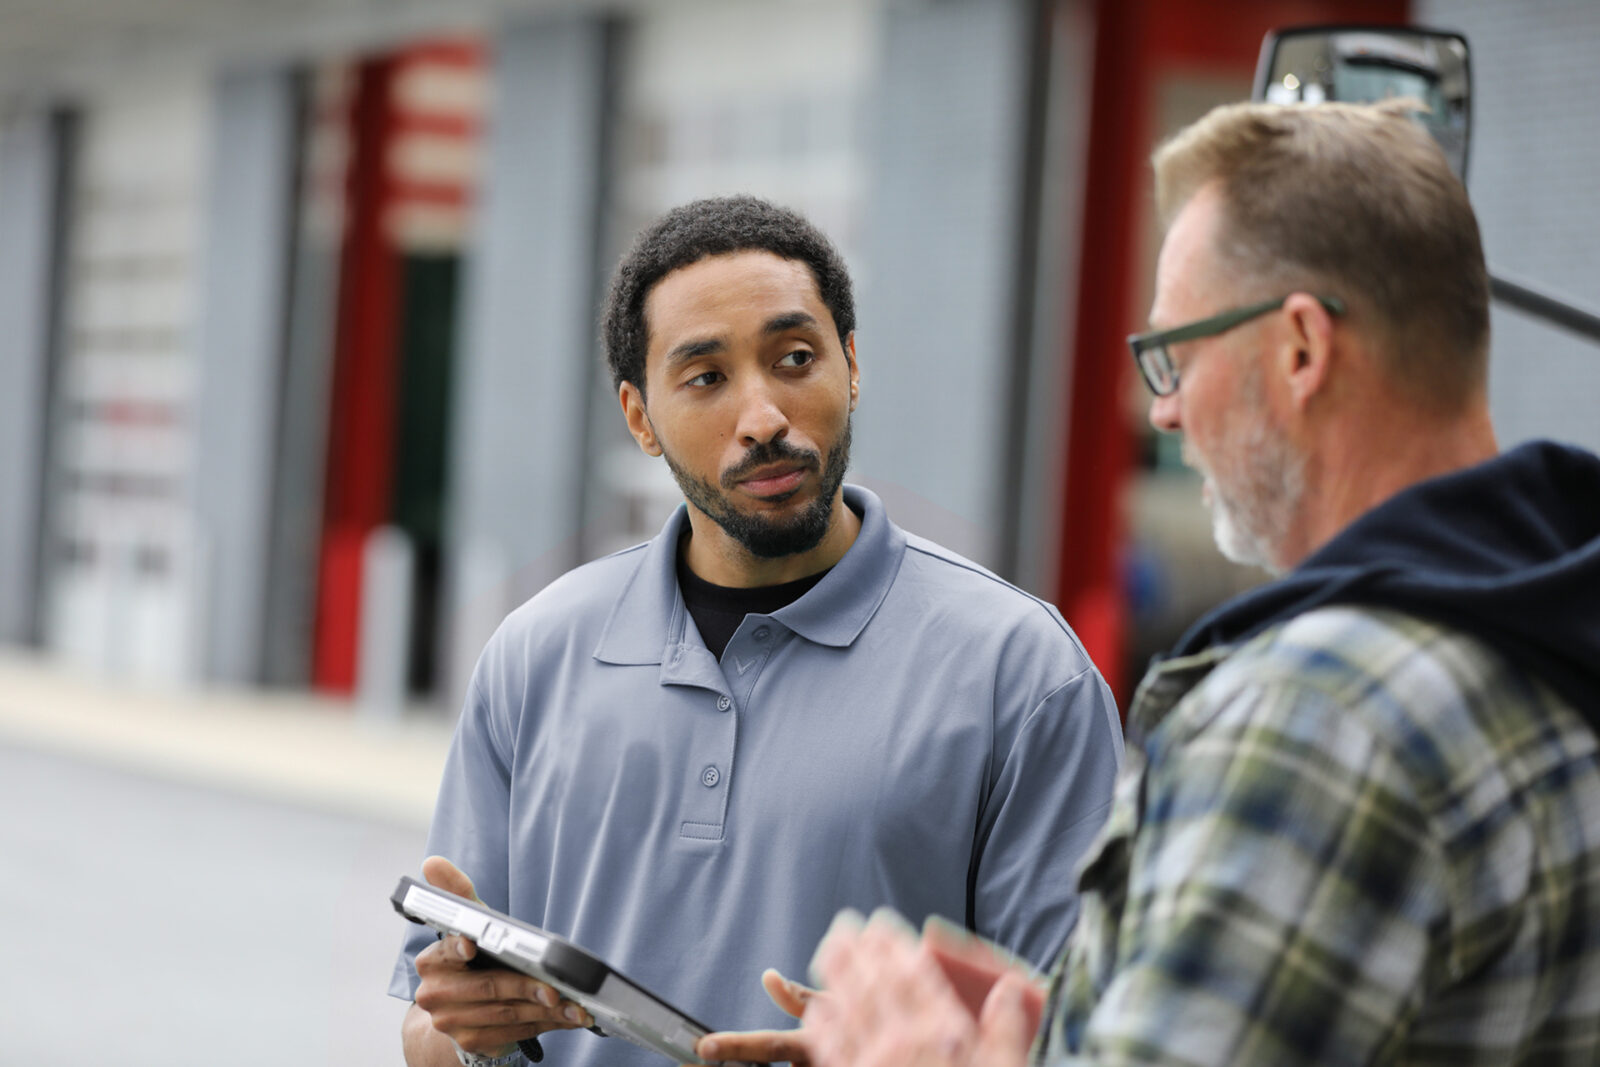 Service Advisor Training Moves to In-Person Format